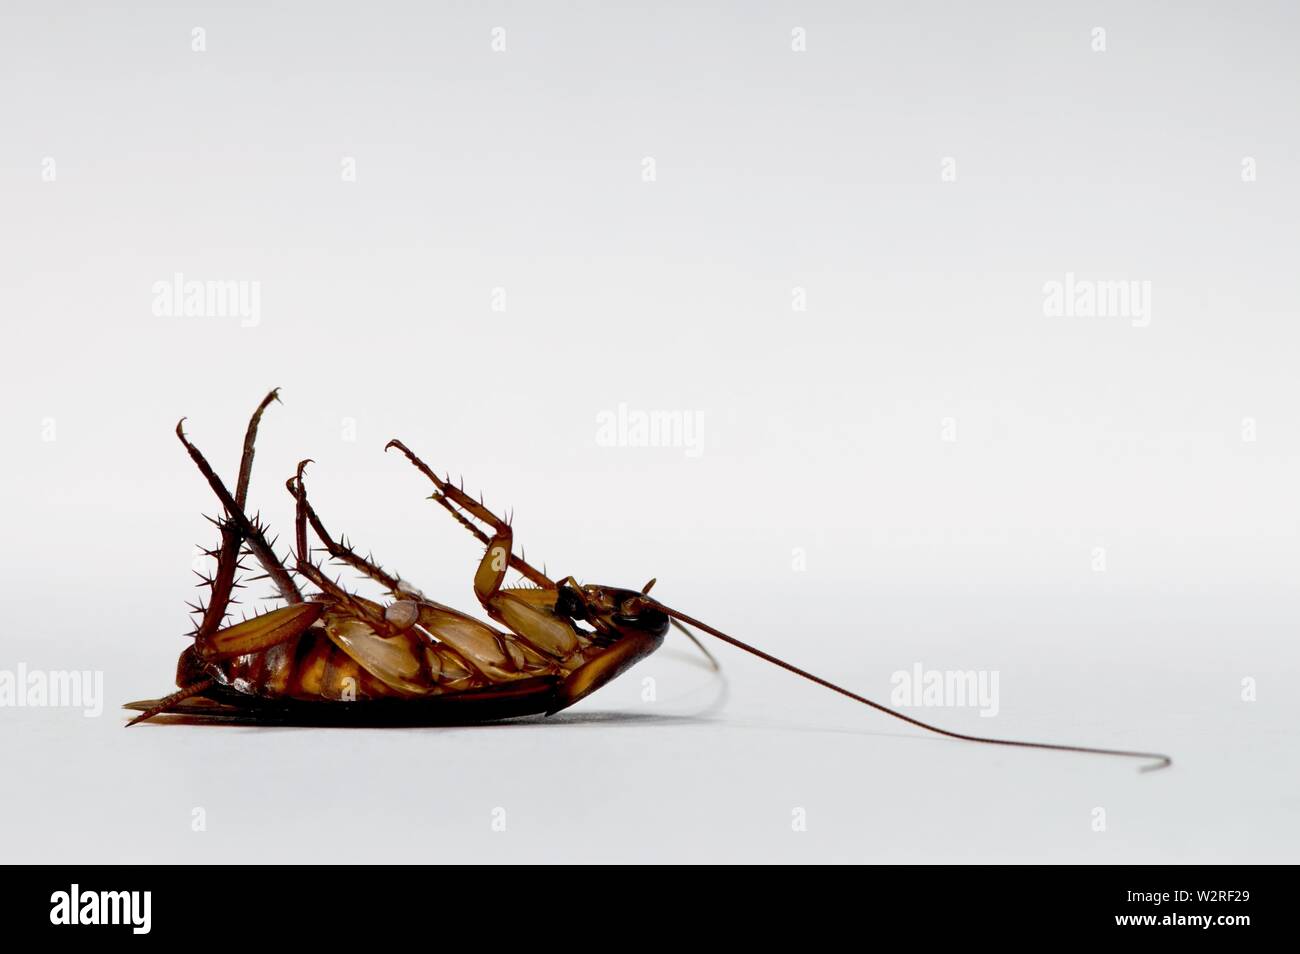 American Cockroach dead on its back after being poisoned by roach bait. Isolated near the bottom left with a plain white background and room for text. Stock Photo